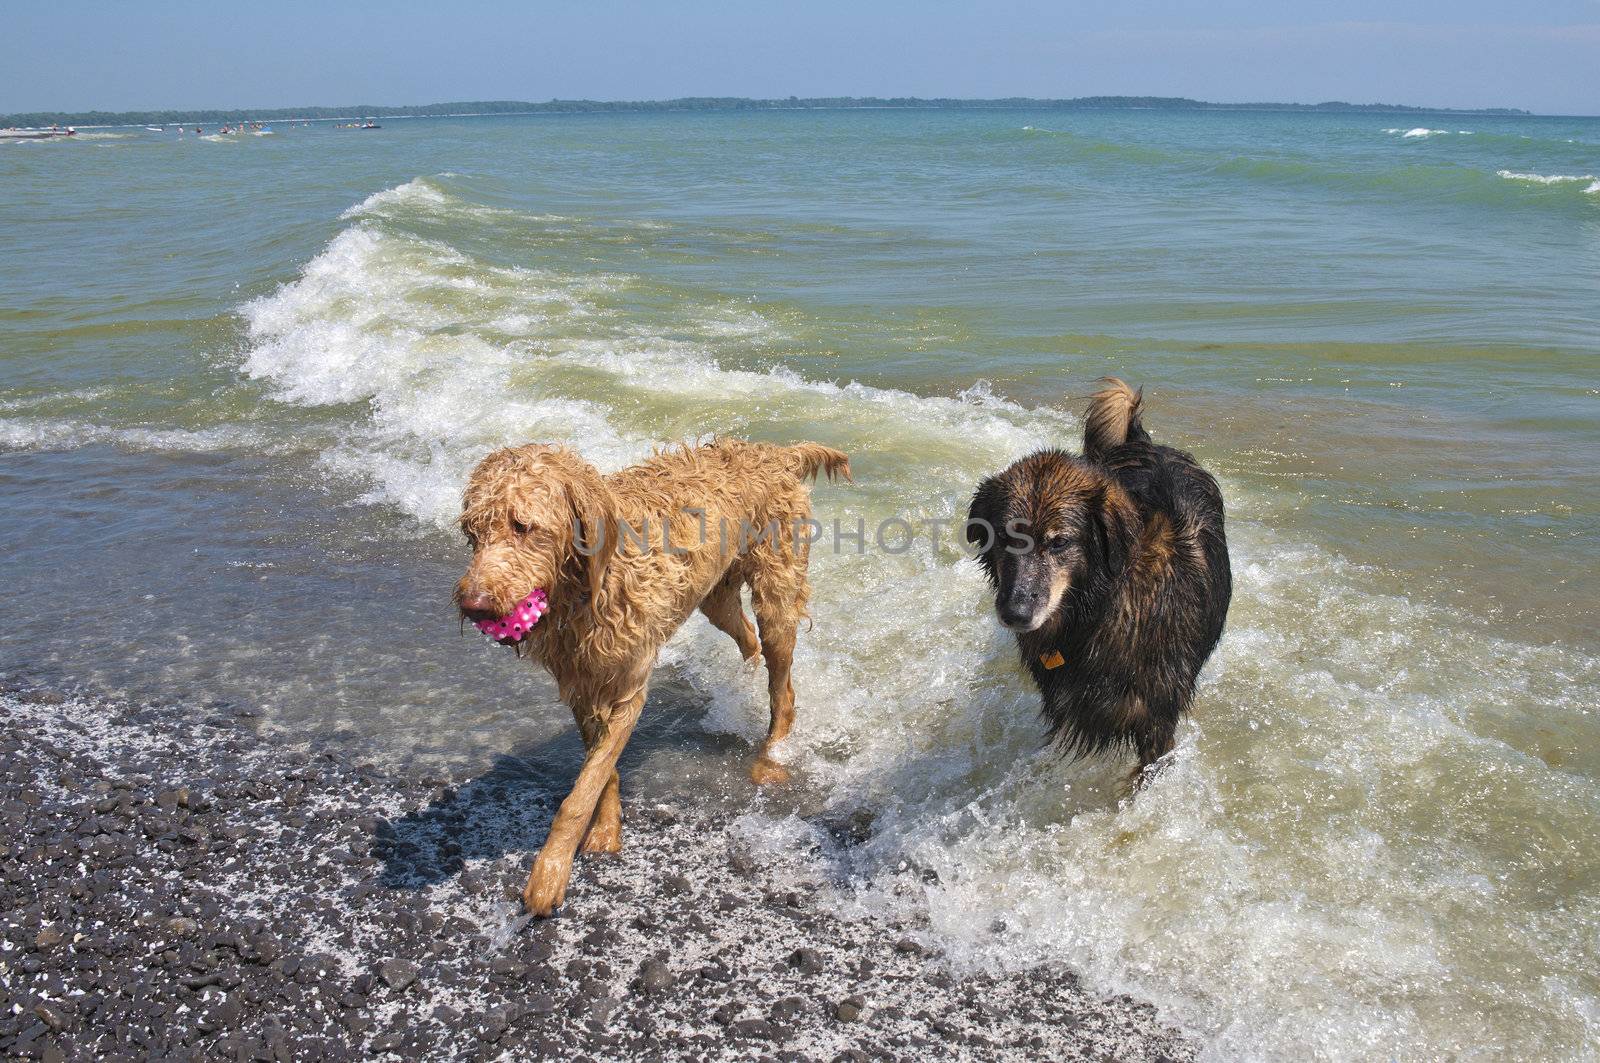 Dogs just coming out of the waves on Lake Ontario after playing ball